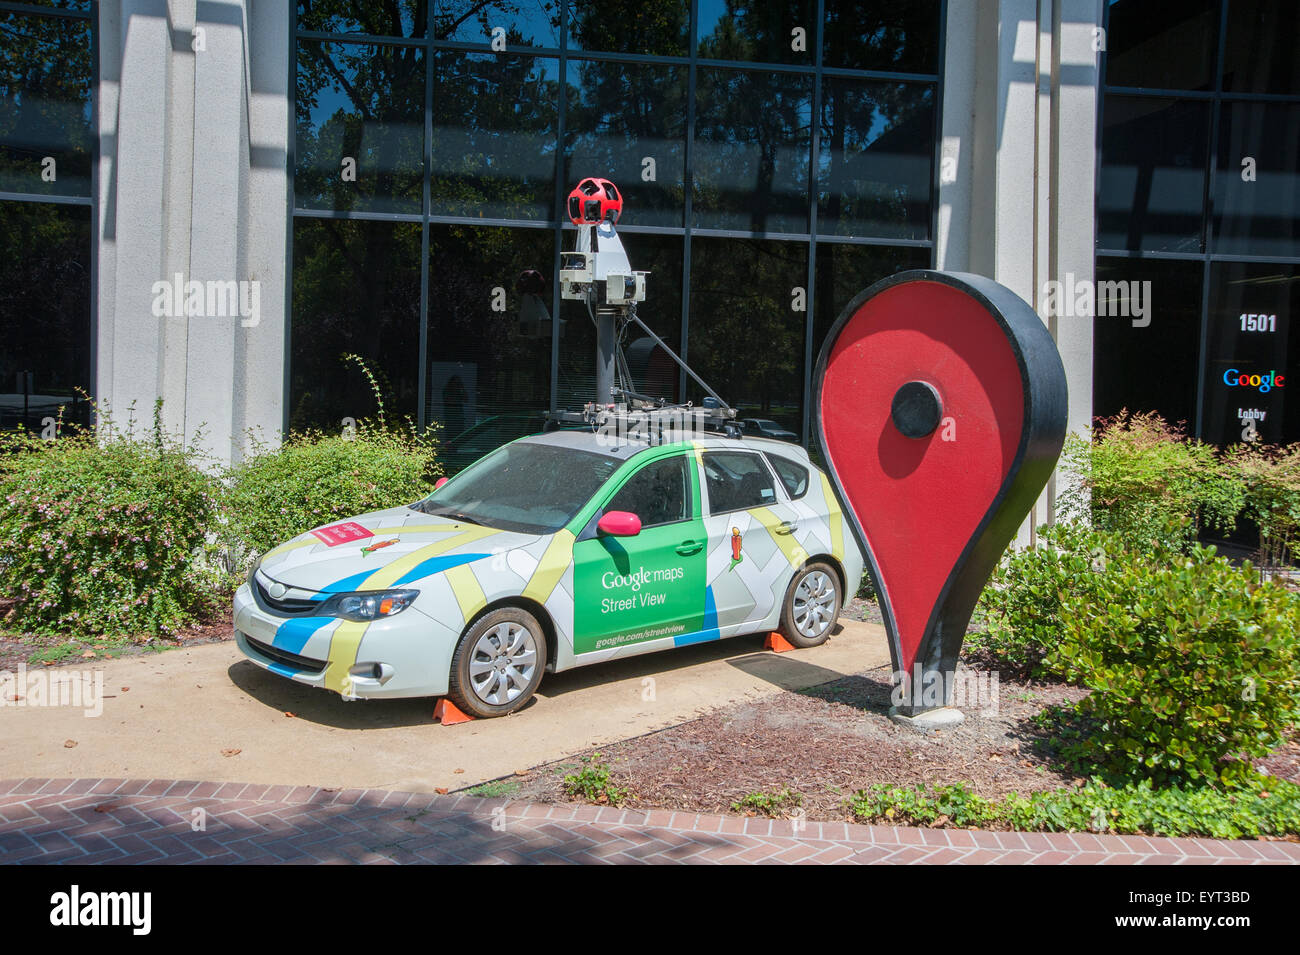 MOUNTAIN VIEW, CA - AUGUST 1, 2015: Google's Street View car on display at Google headquarters in Mountain View, California on A Stock Photo